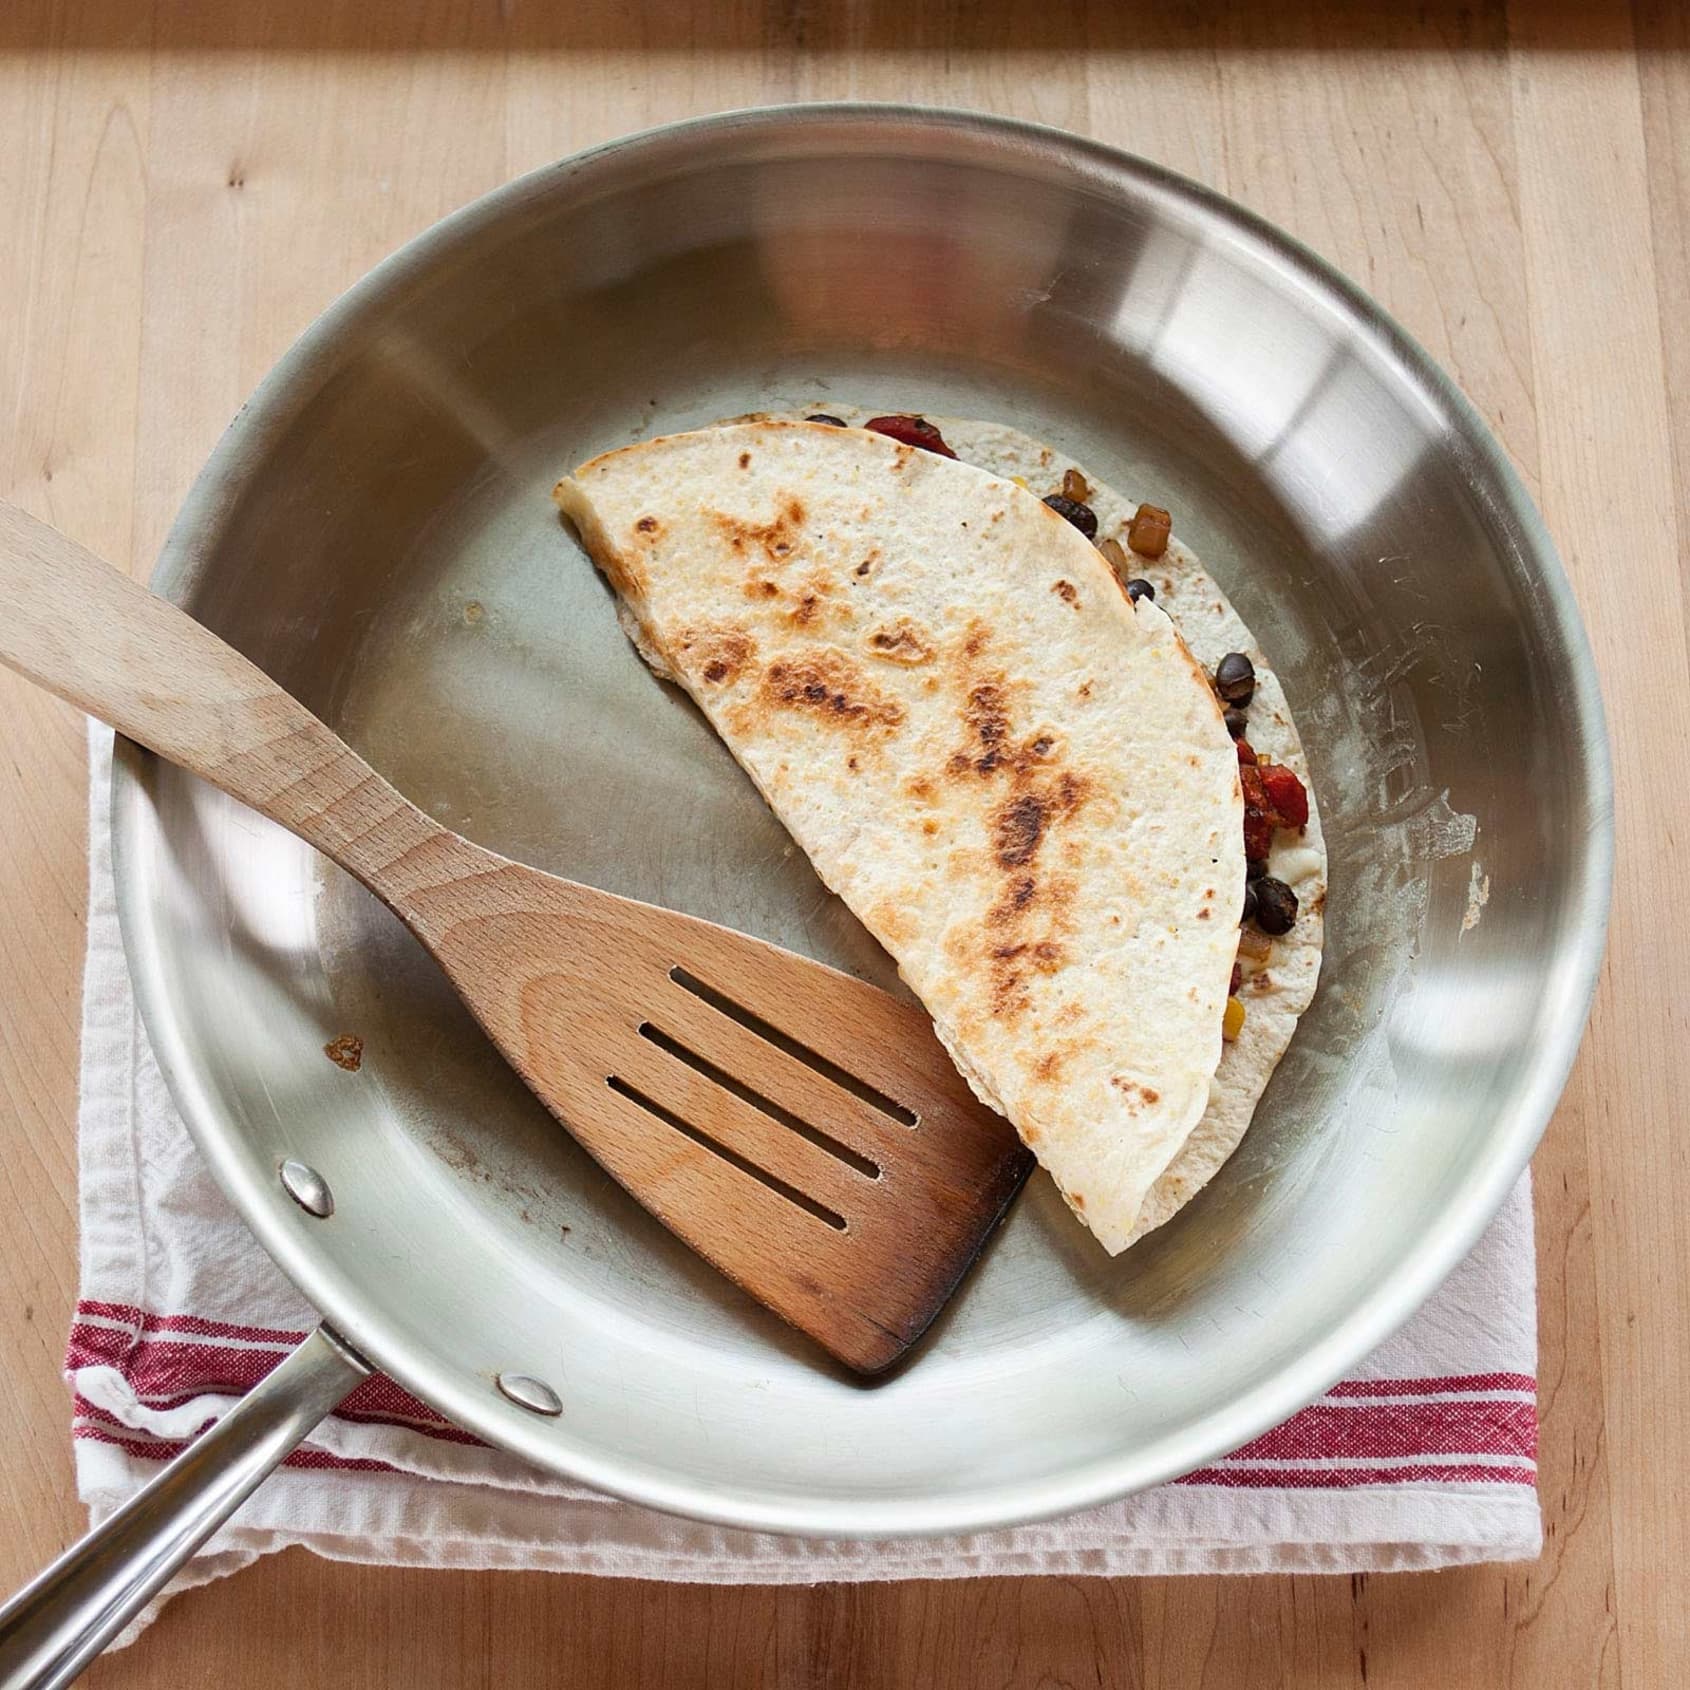 The Best Cheese & Onion Quesadillas - Feels Like Home™